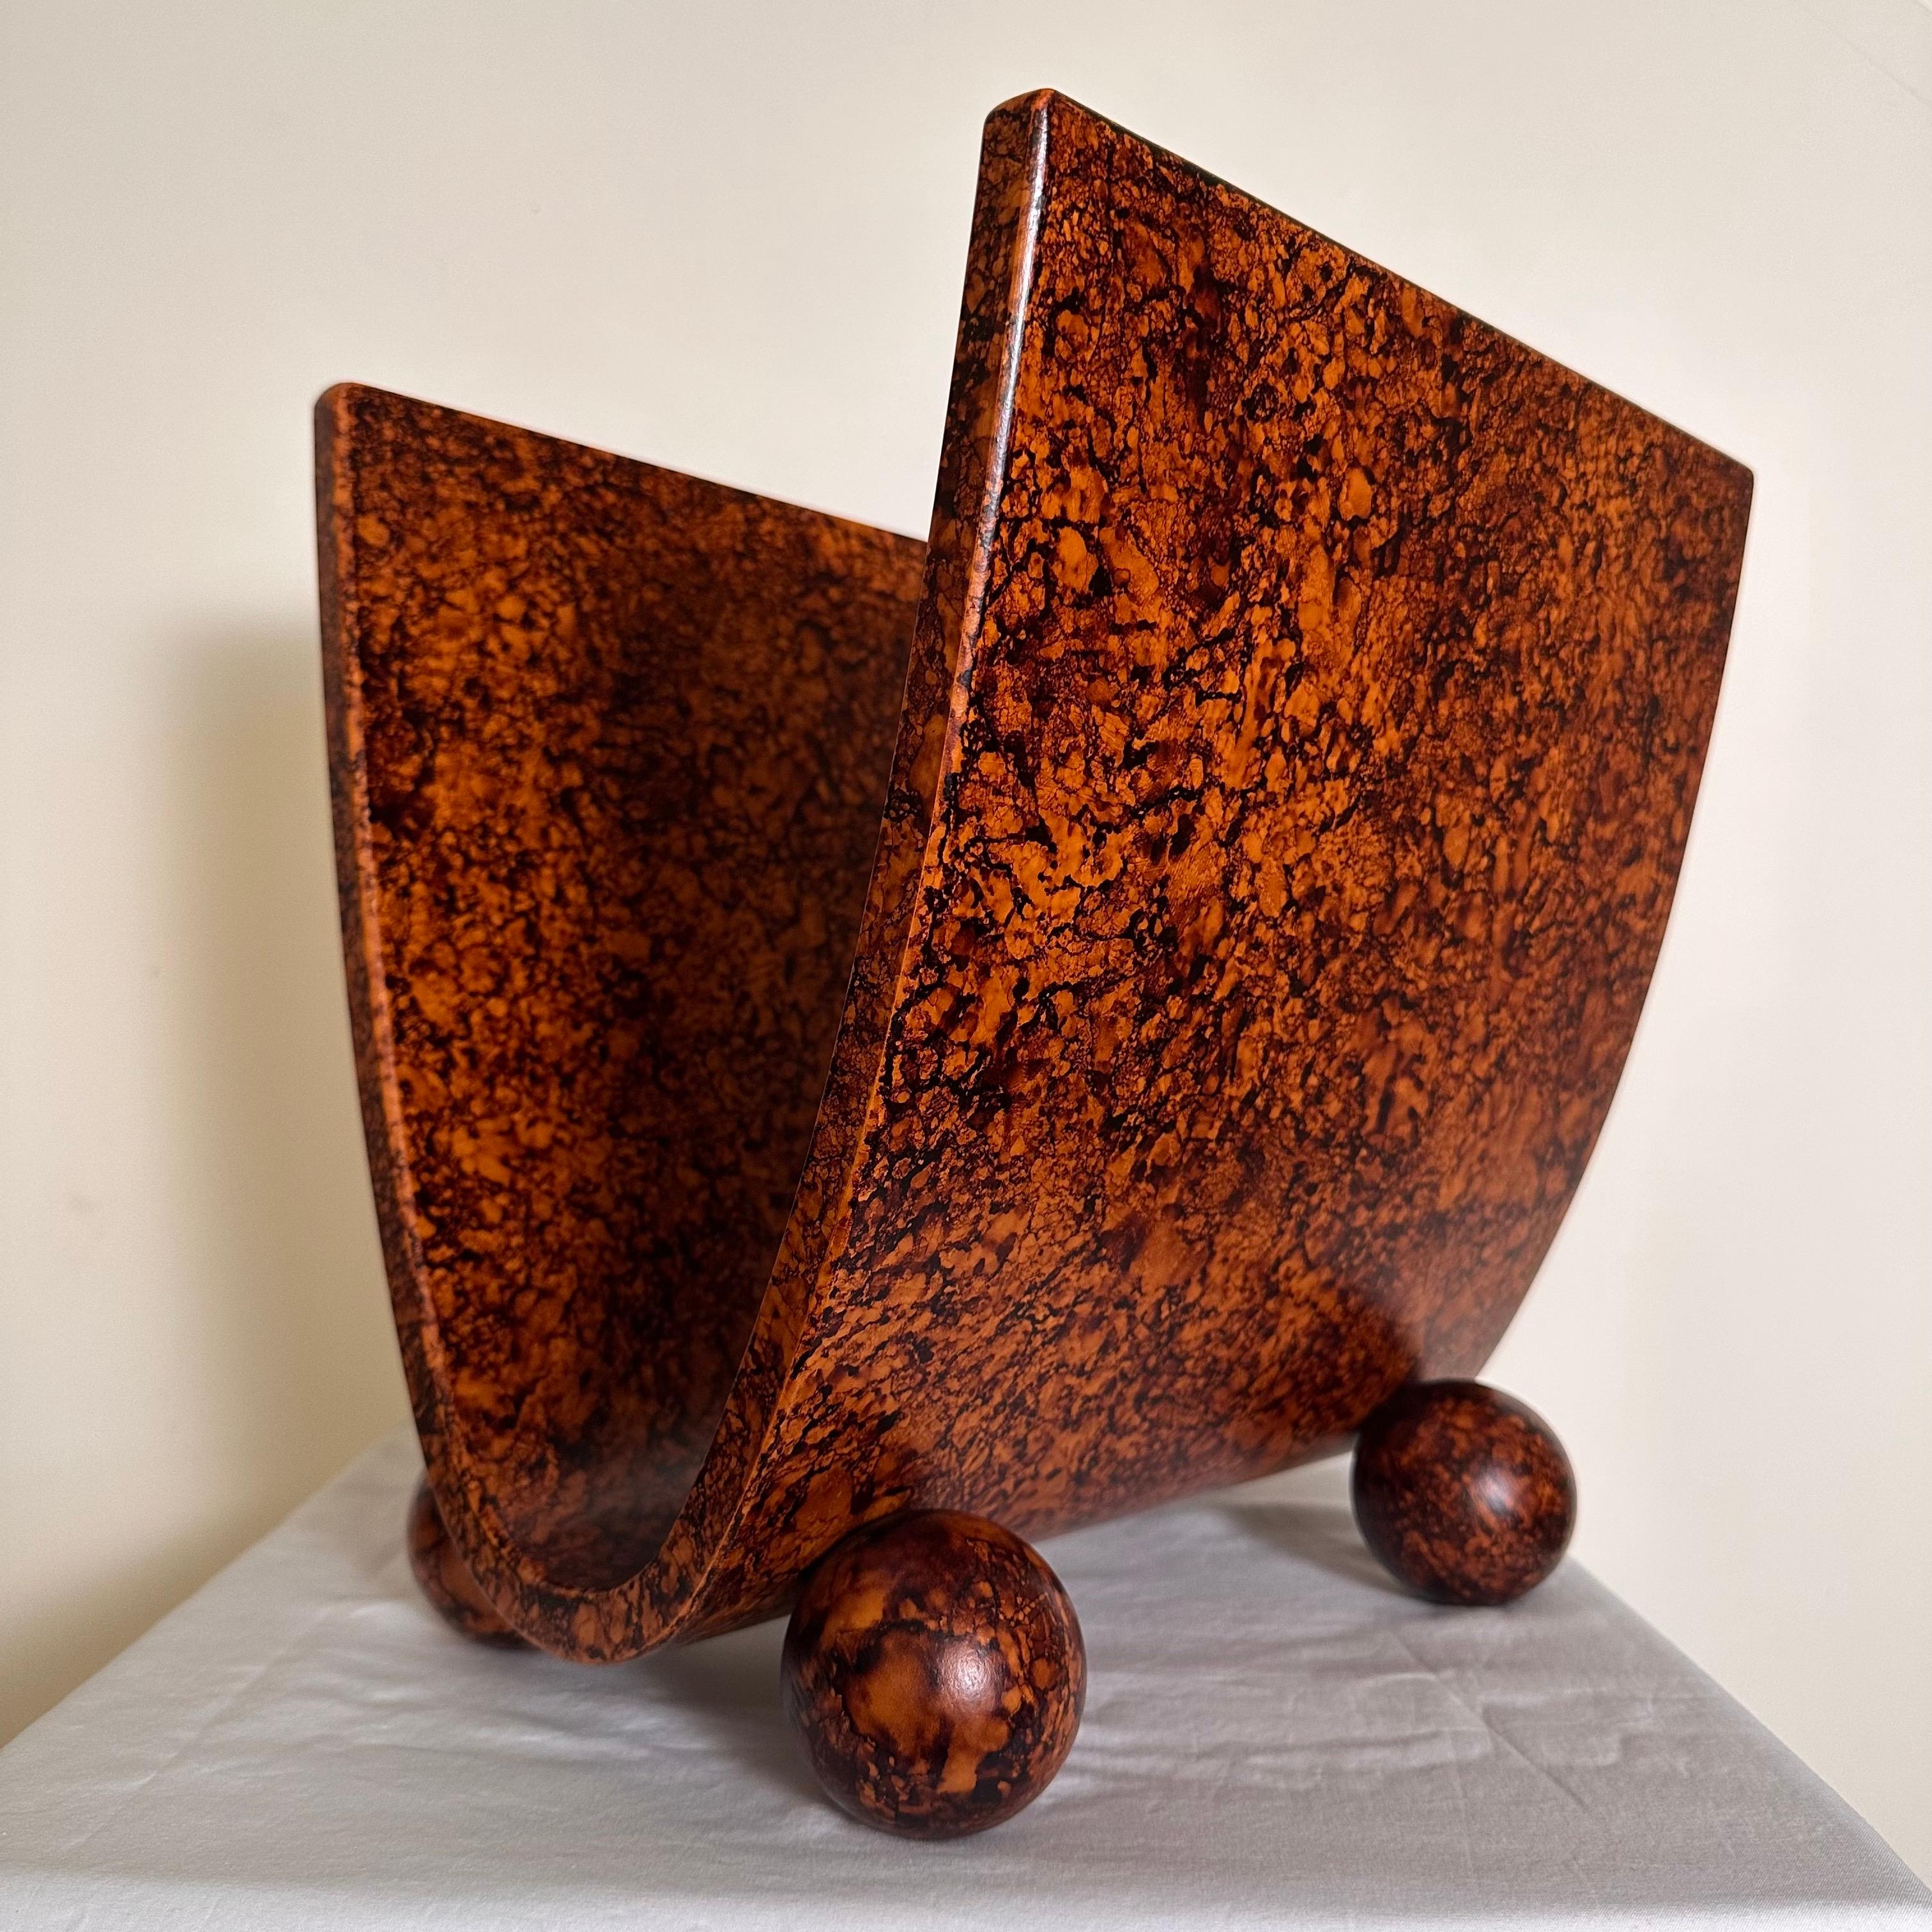 Vintage Art Deco Post Modern Style Magazine Rack in Faux Burl Wood Stain Finish For Sale 5